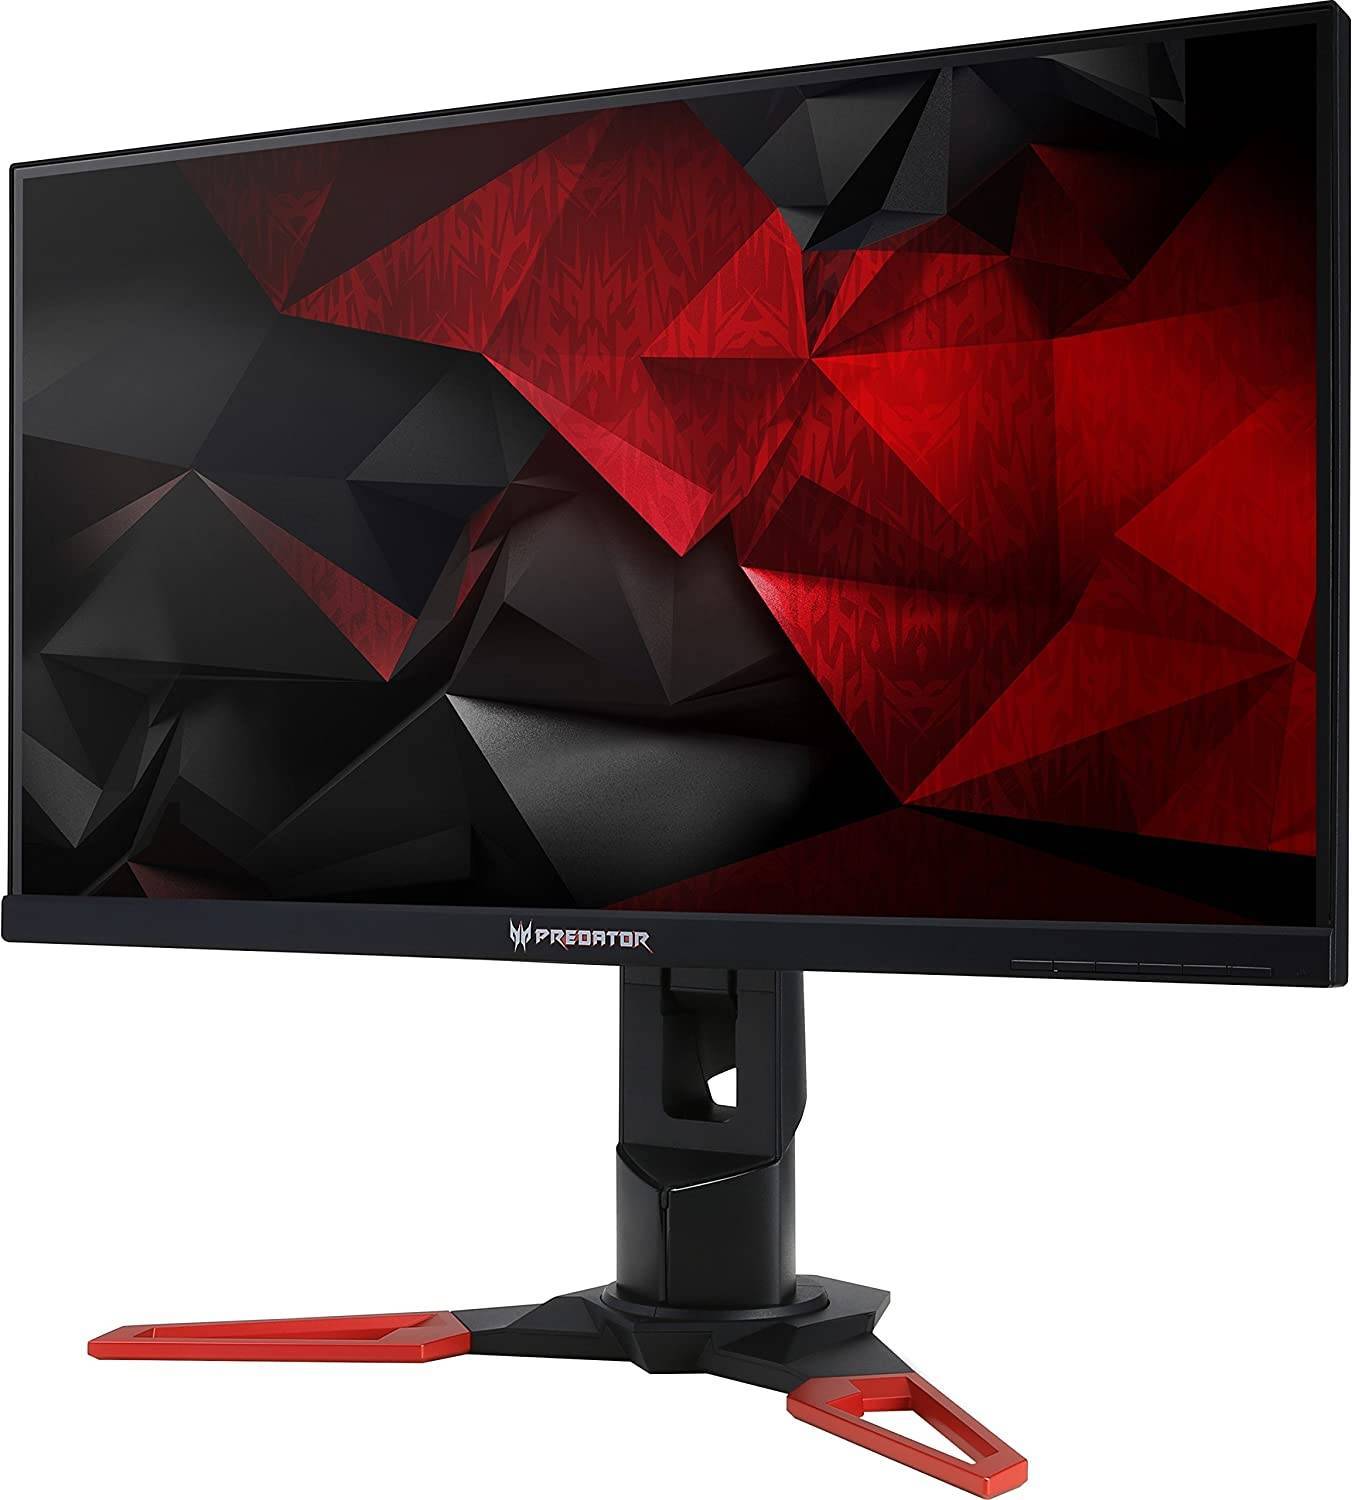 7.Acer XB241H- Perfect monitor for your needs